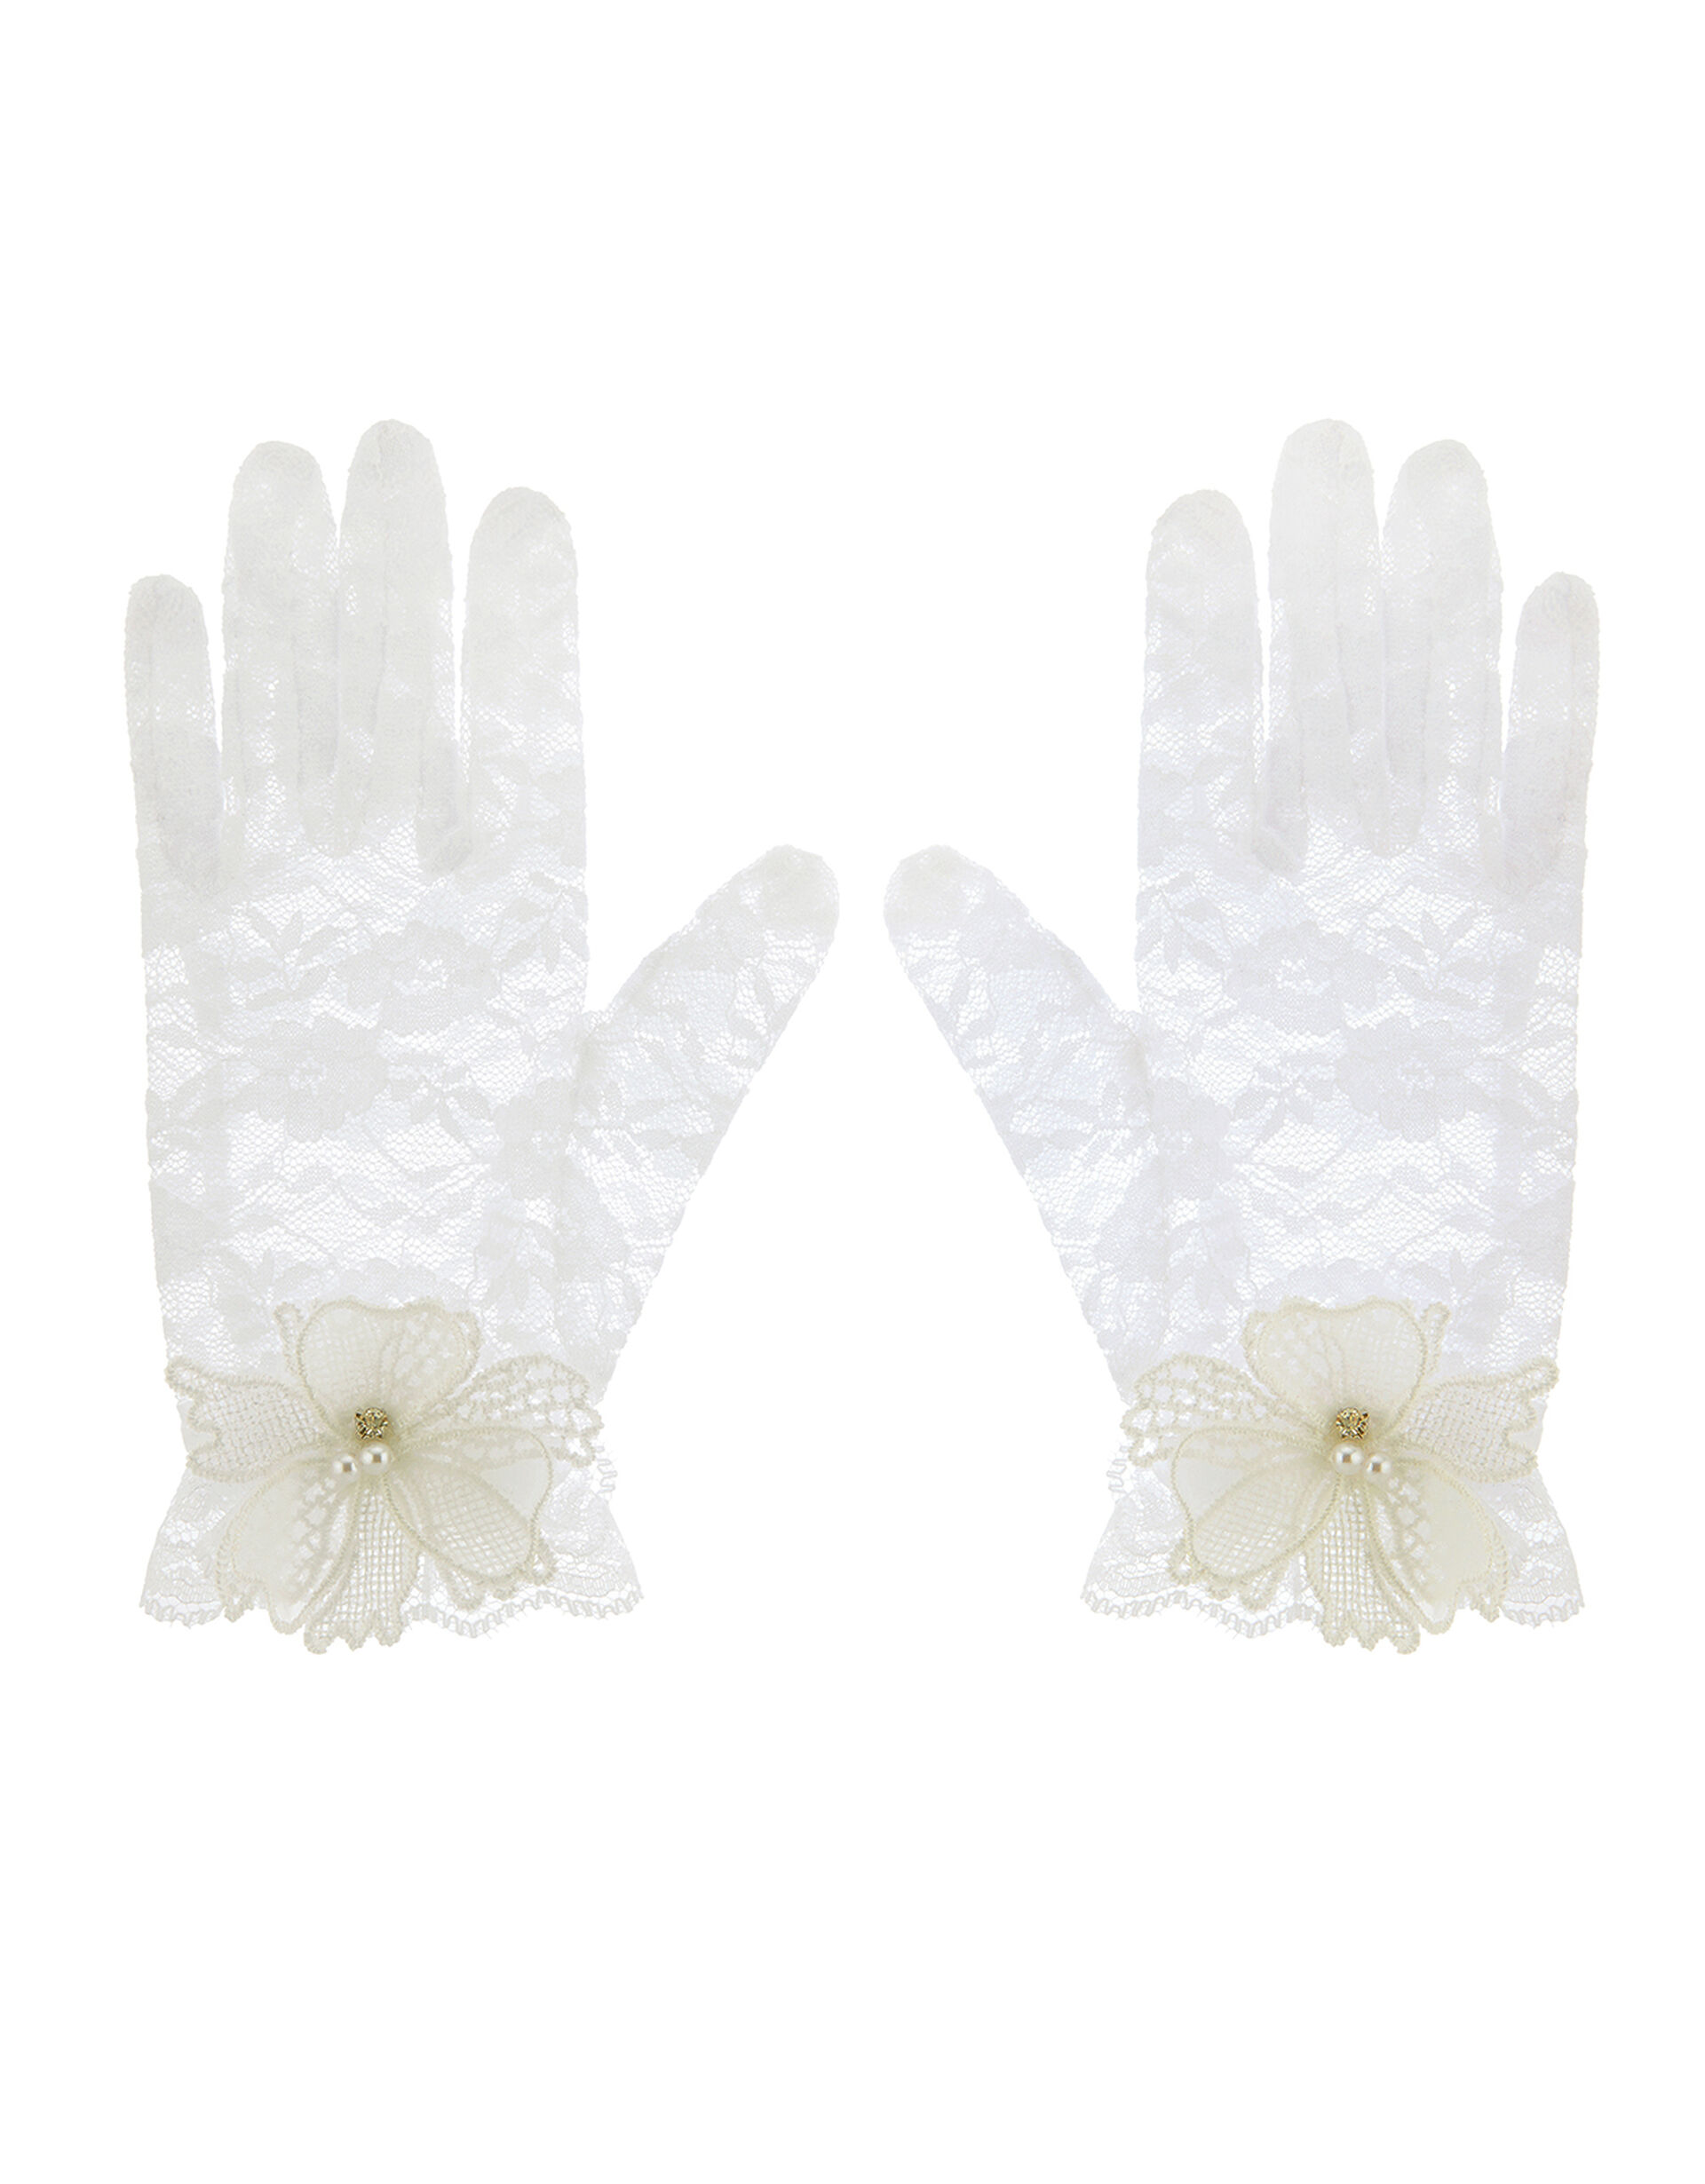 Lace Butterfly Embellished Gloves, , large